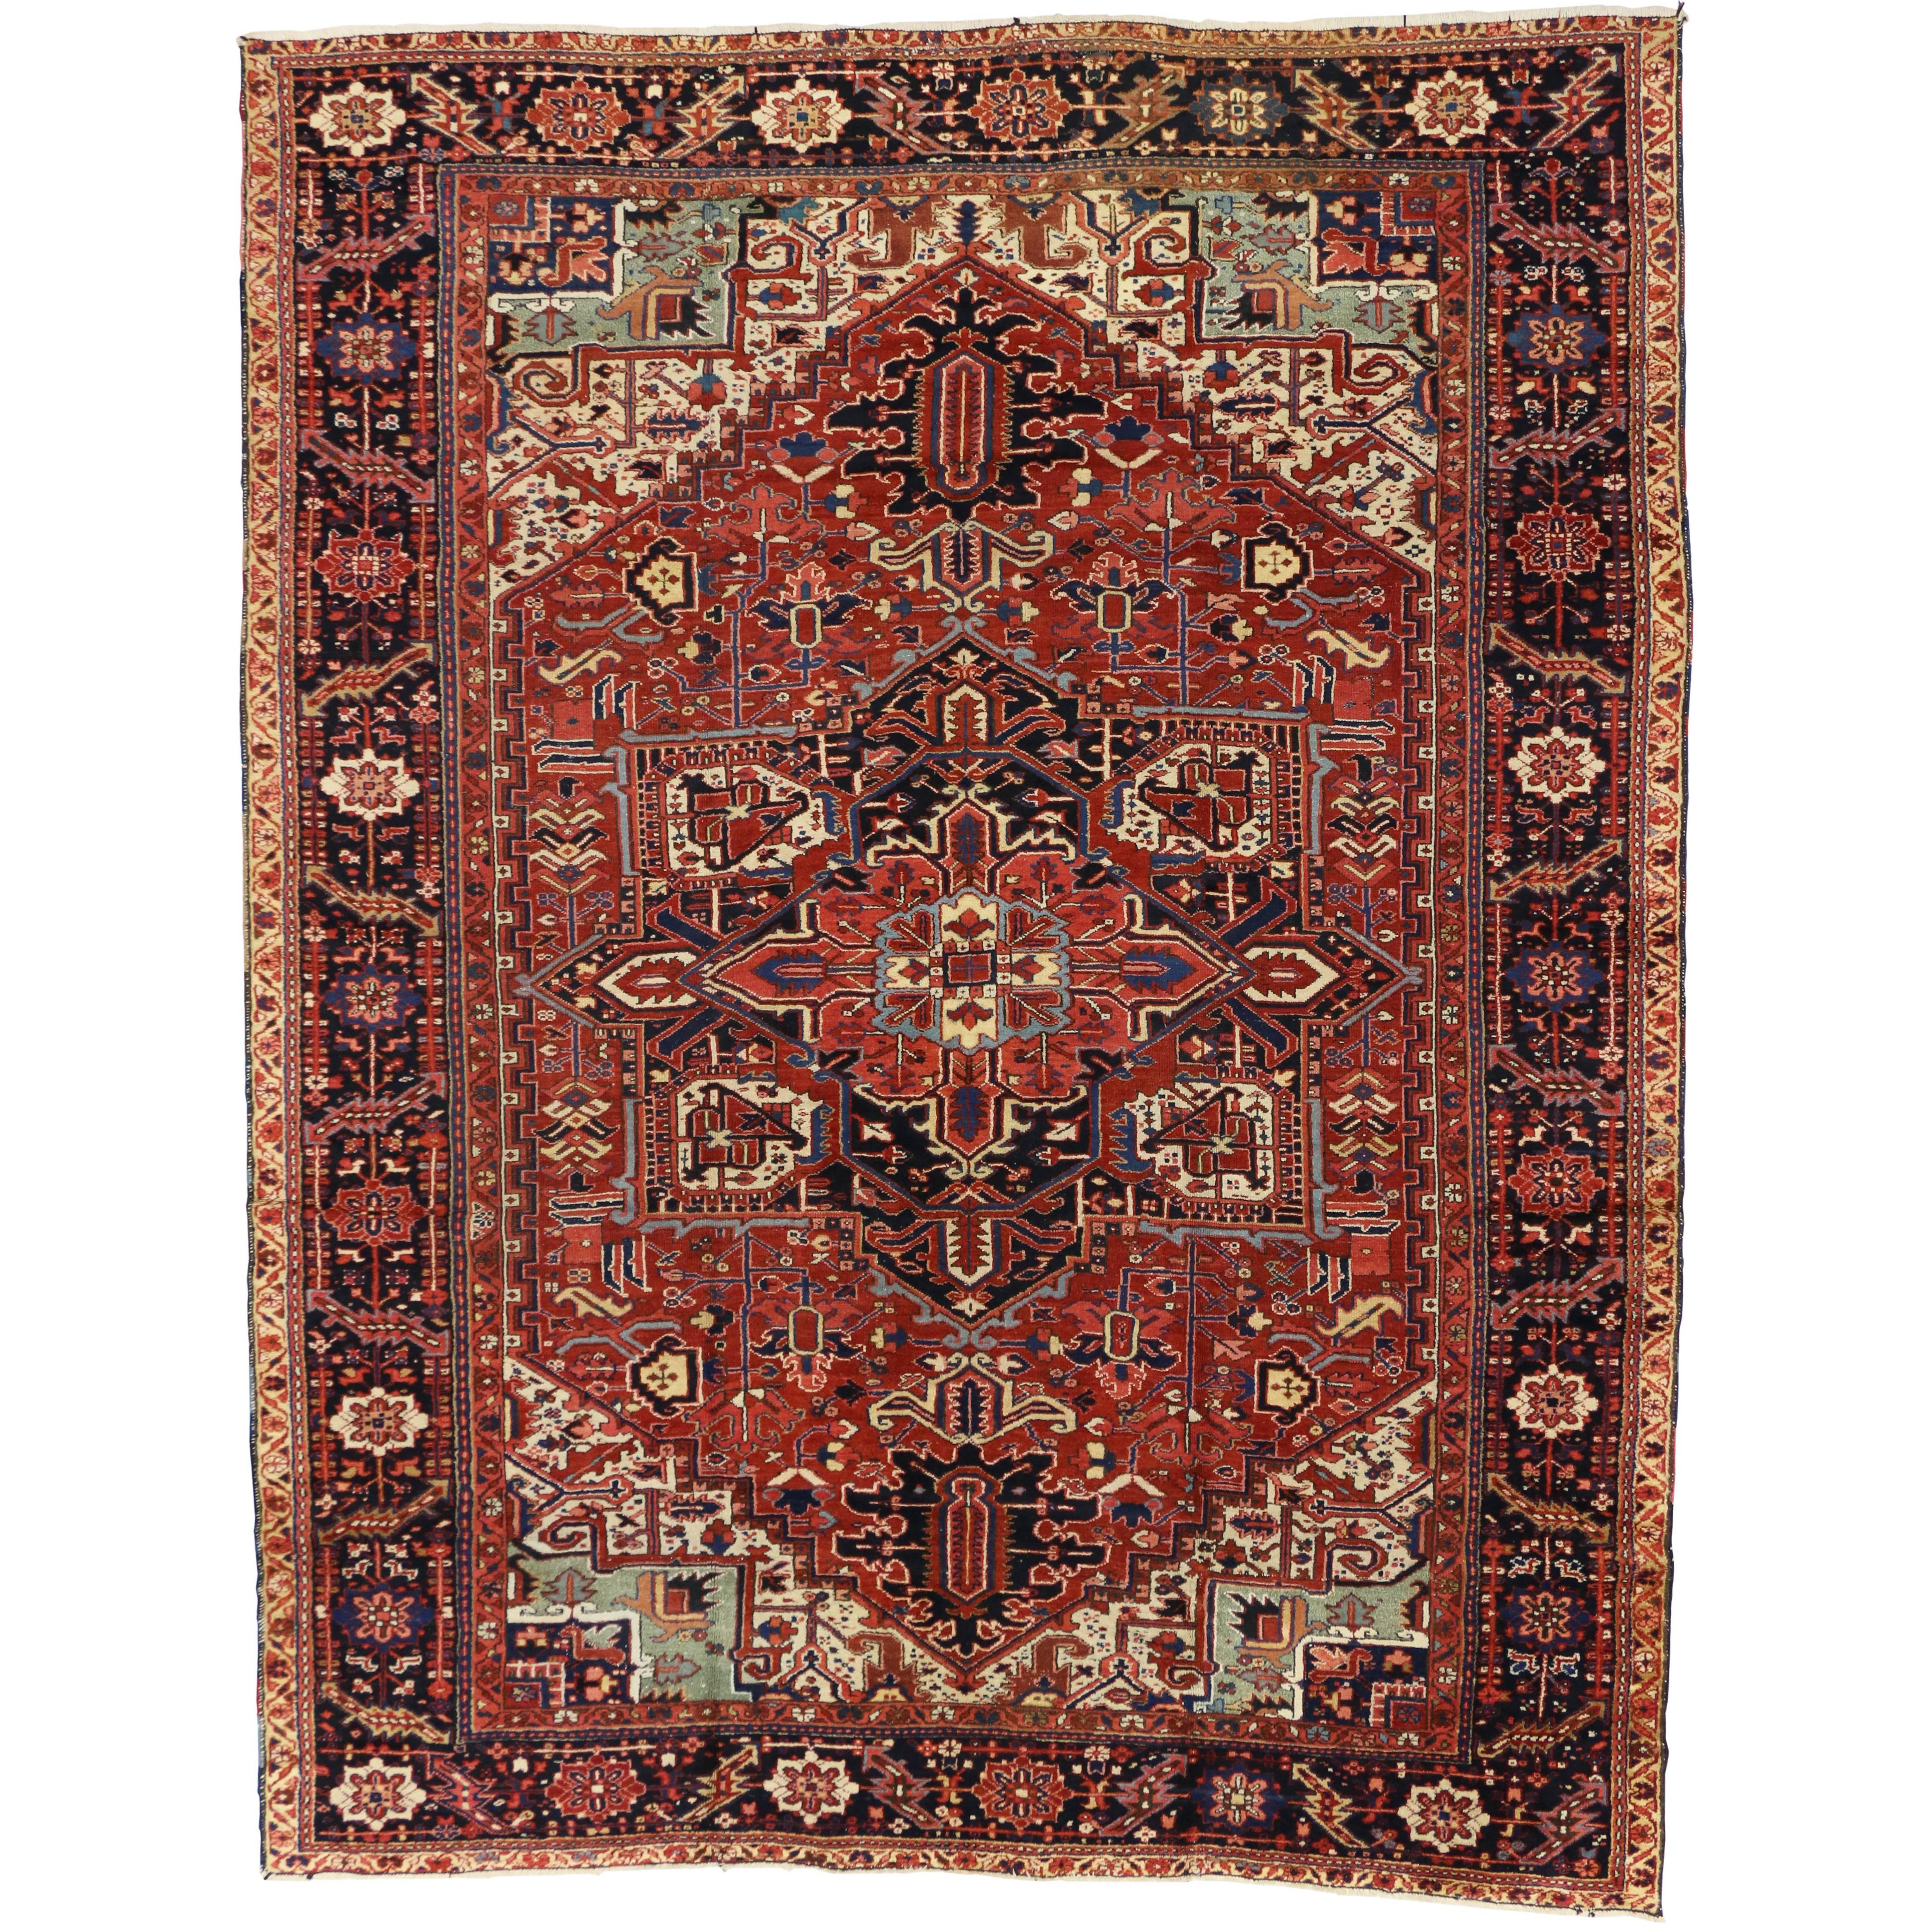 Antique Persian Heriz Rug with Modern American Craftsman Style